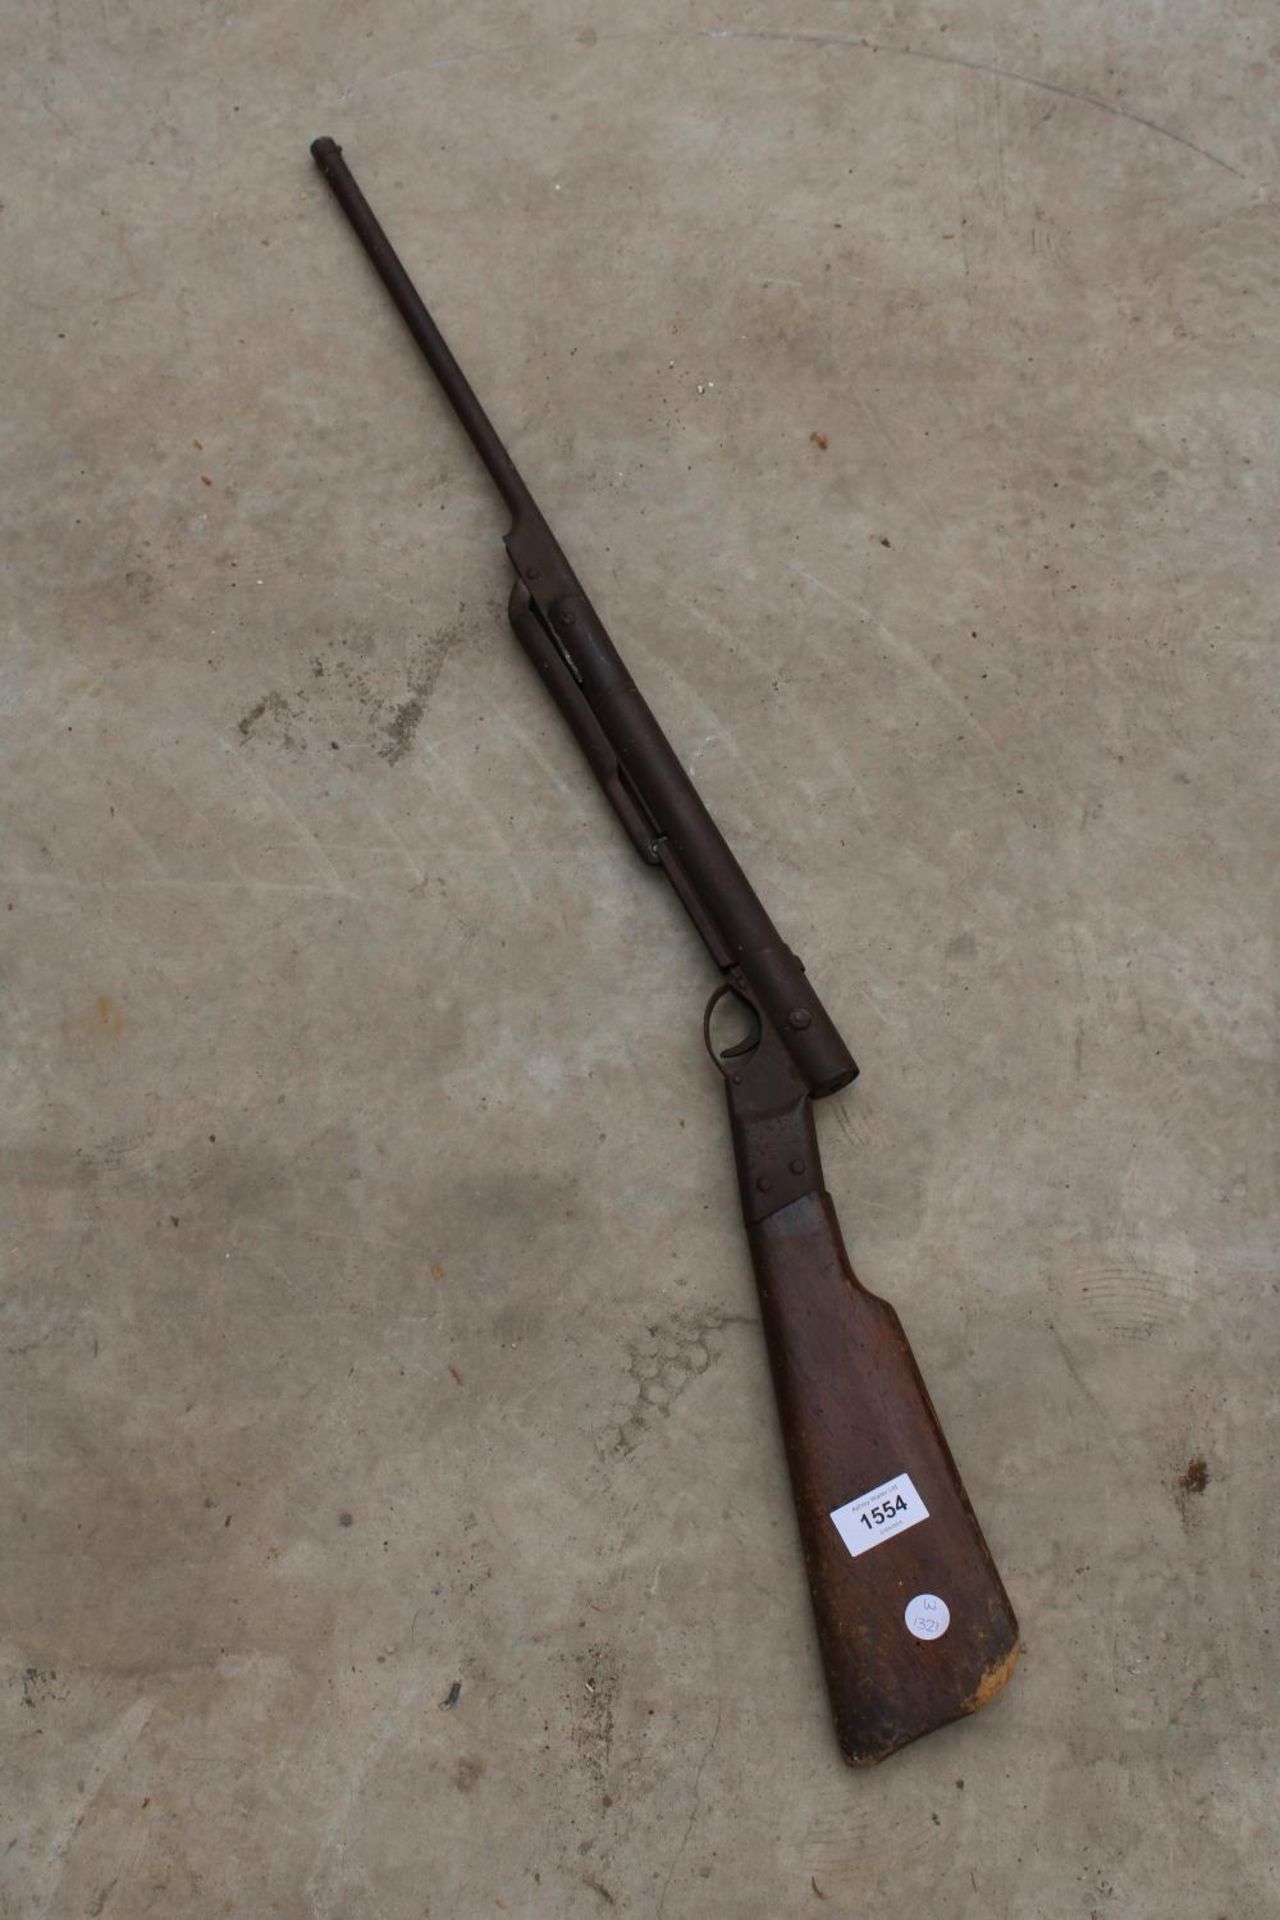 A VINTAGE WOODEN AND METAL AIR RIFLE